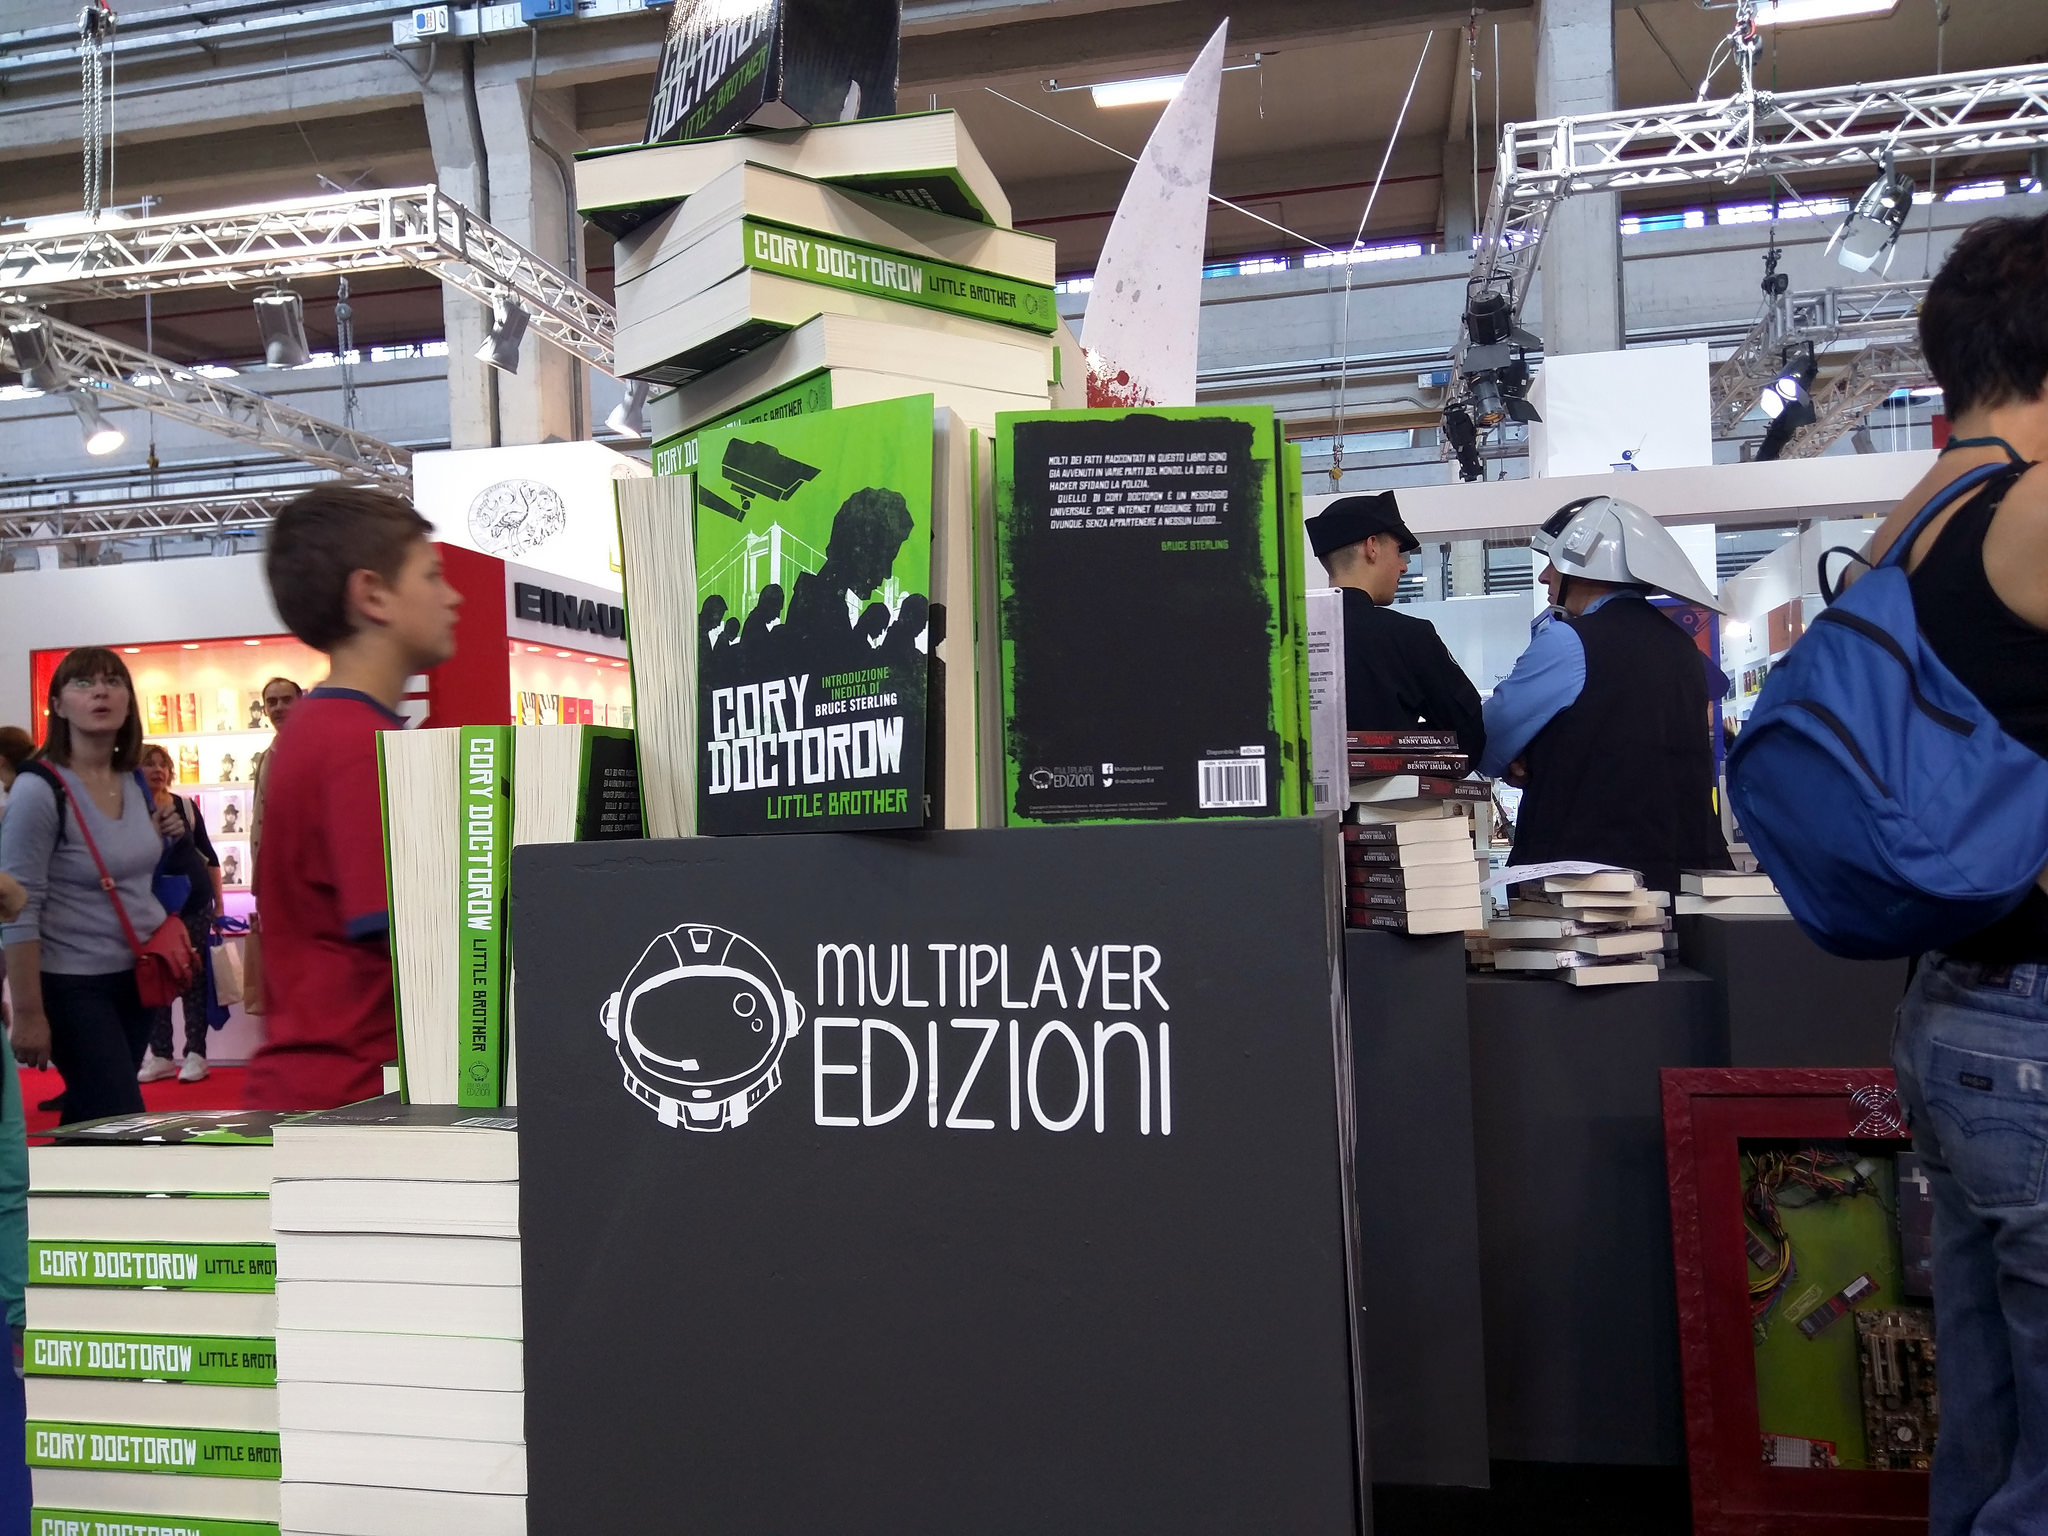 Stack of Little Brothers, Multiplayer Editions booth, Book Fair, Turin, Italy